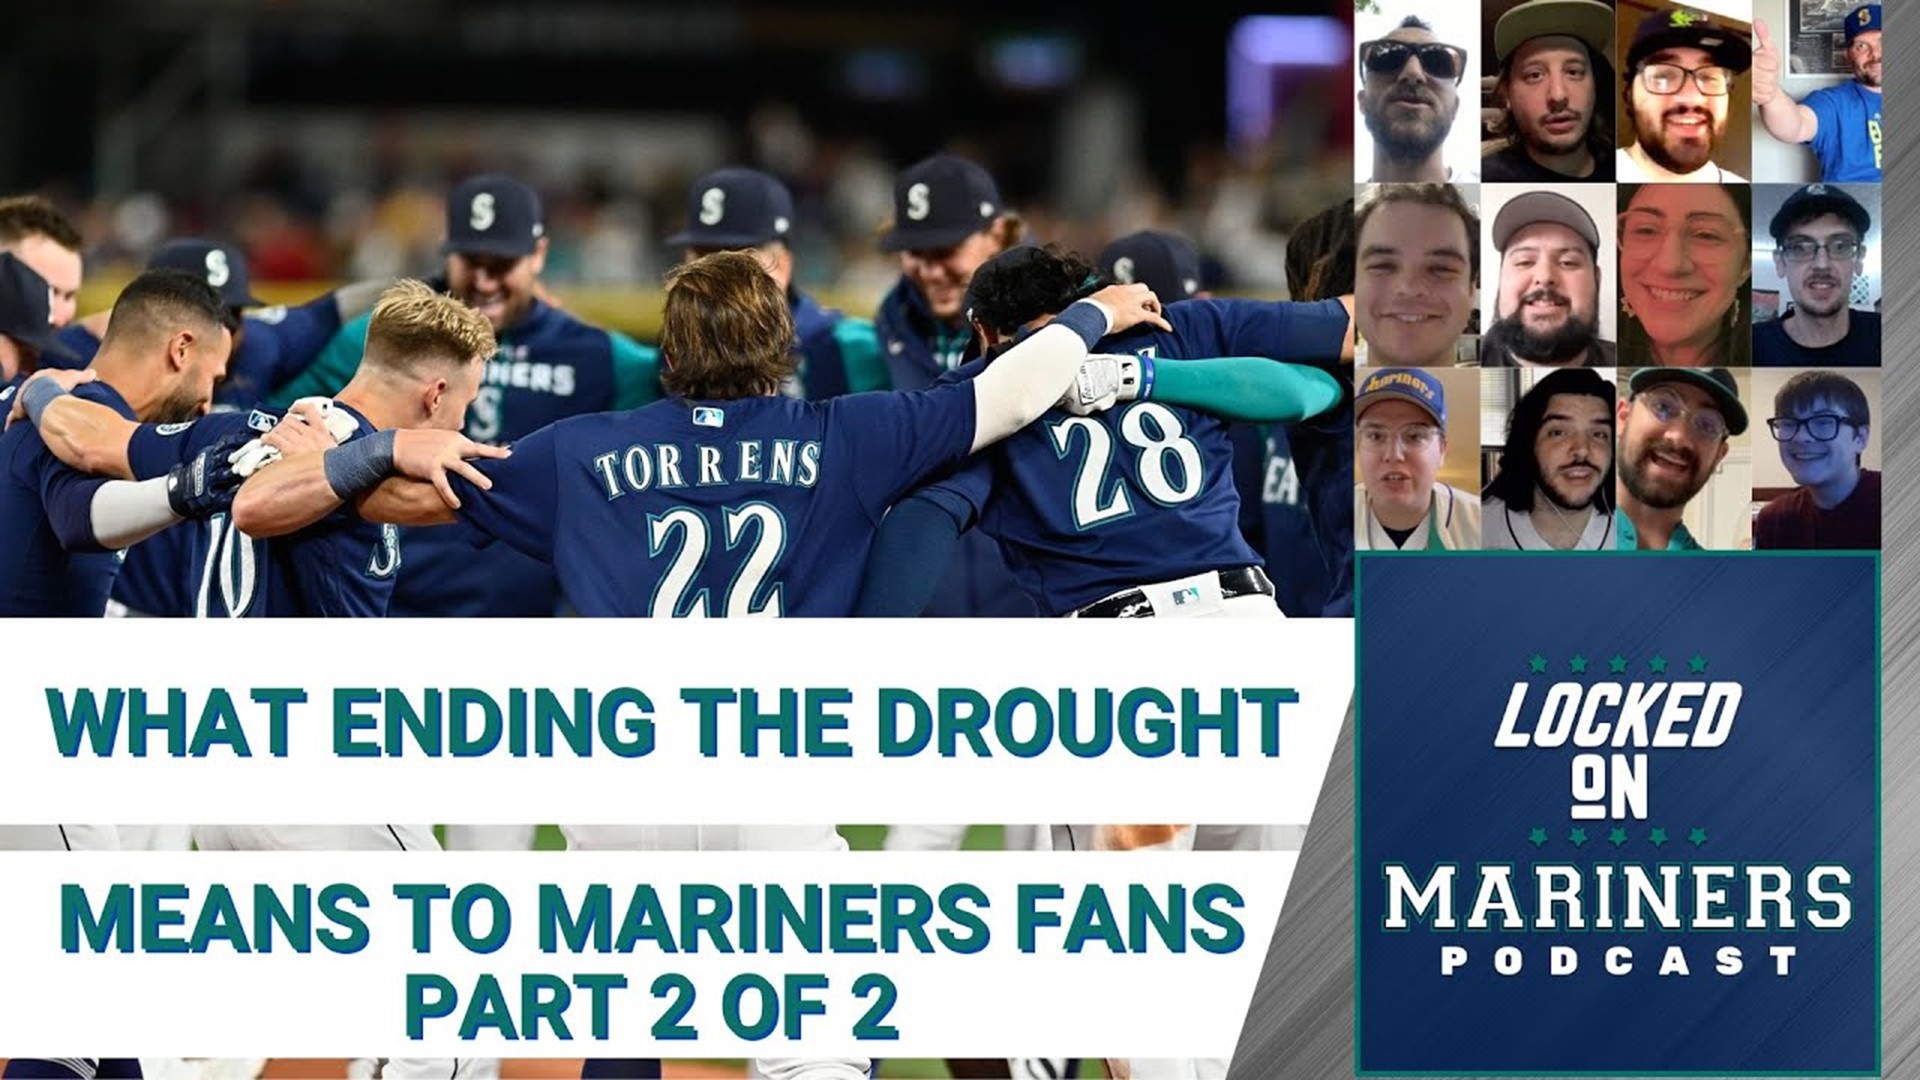 The Seattle Mariners can clinch their first playoff berth in 21 years with either a win or an Orioles loss on Friday night